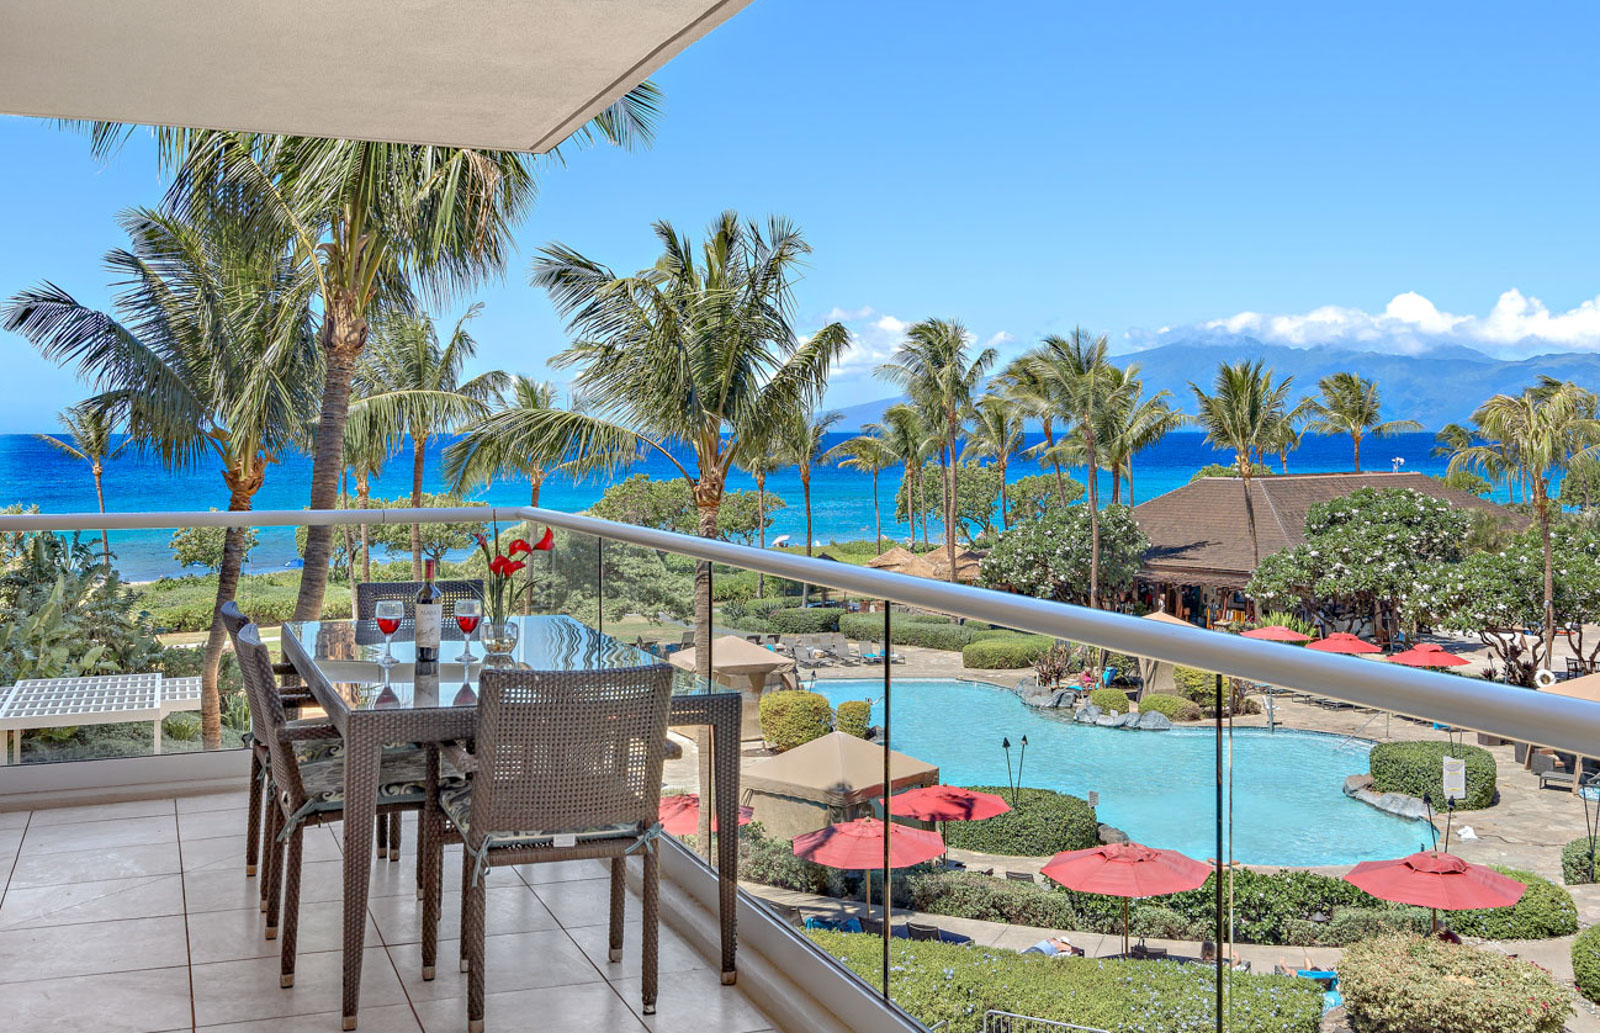 Property Image 1 - 2BR Deluxe Ocean View at Upscale Kaanapali Beach Resort